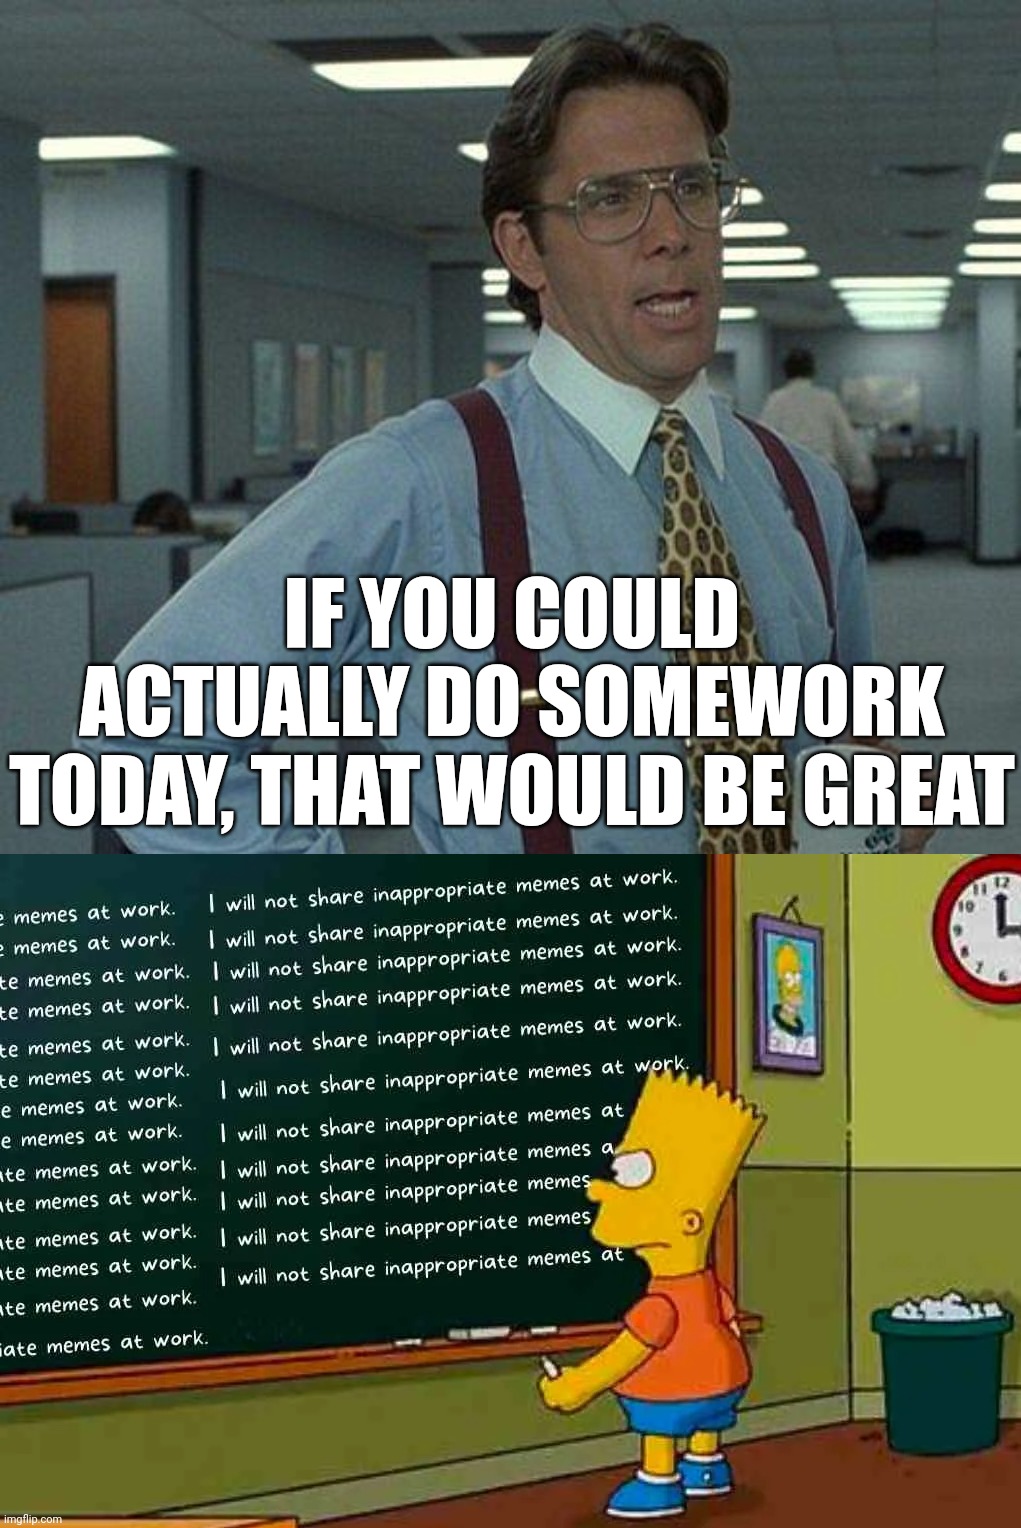 IF YOU COULD ACTUALLY DO SOMEWORK TODAY, THAT WOULD BE GREAT | image tagged in yeah if you could | made w/ Imgflip meme maker